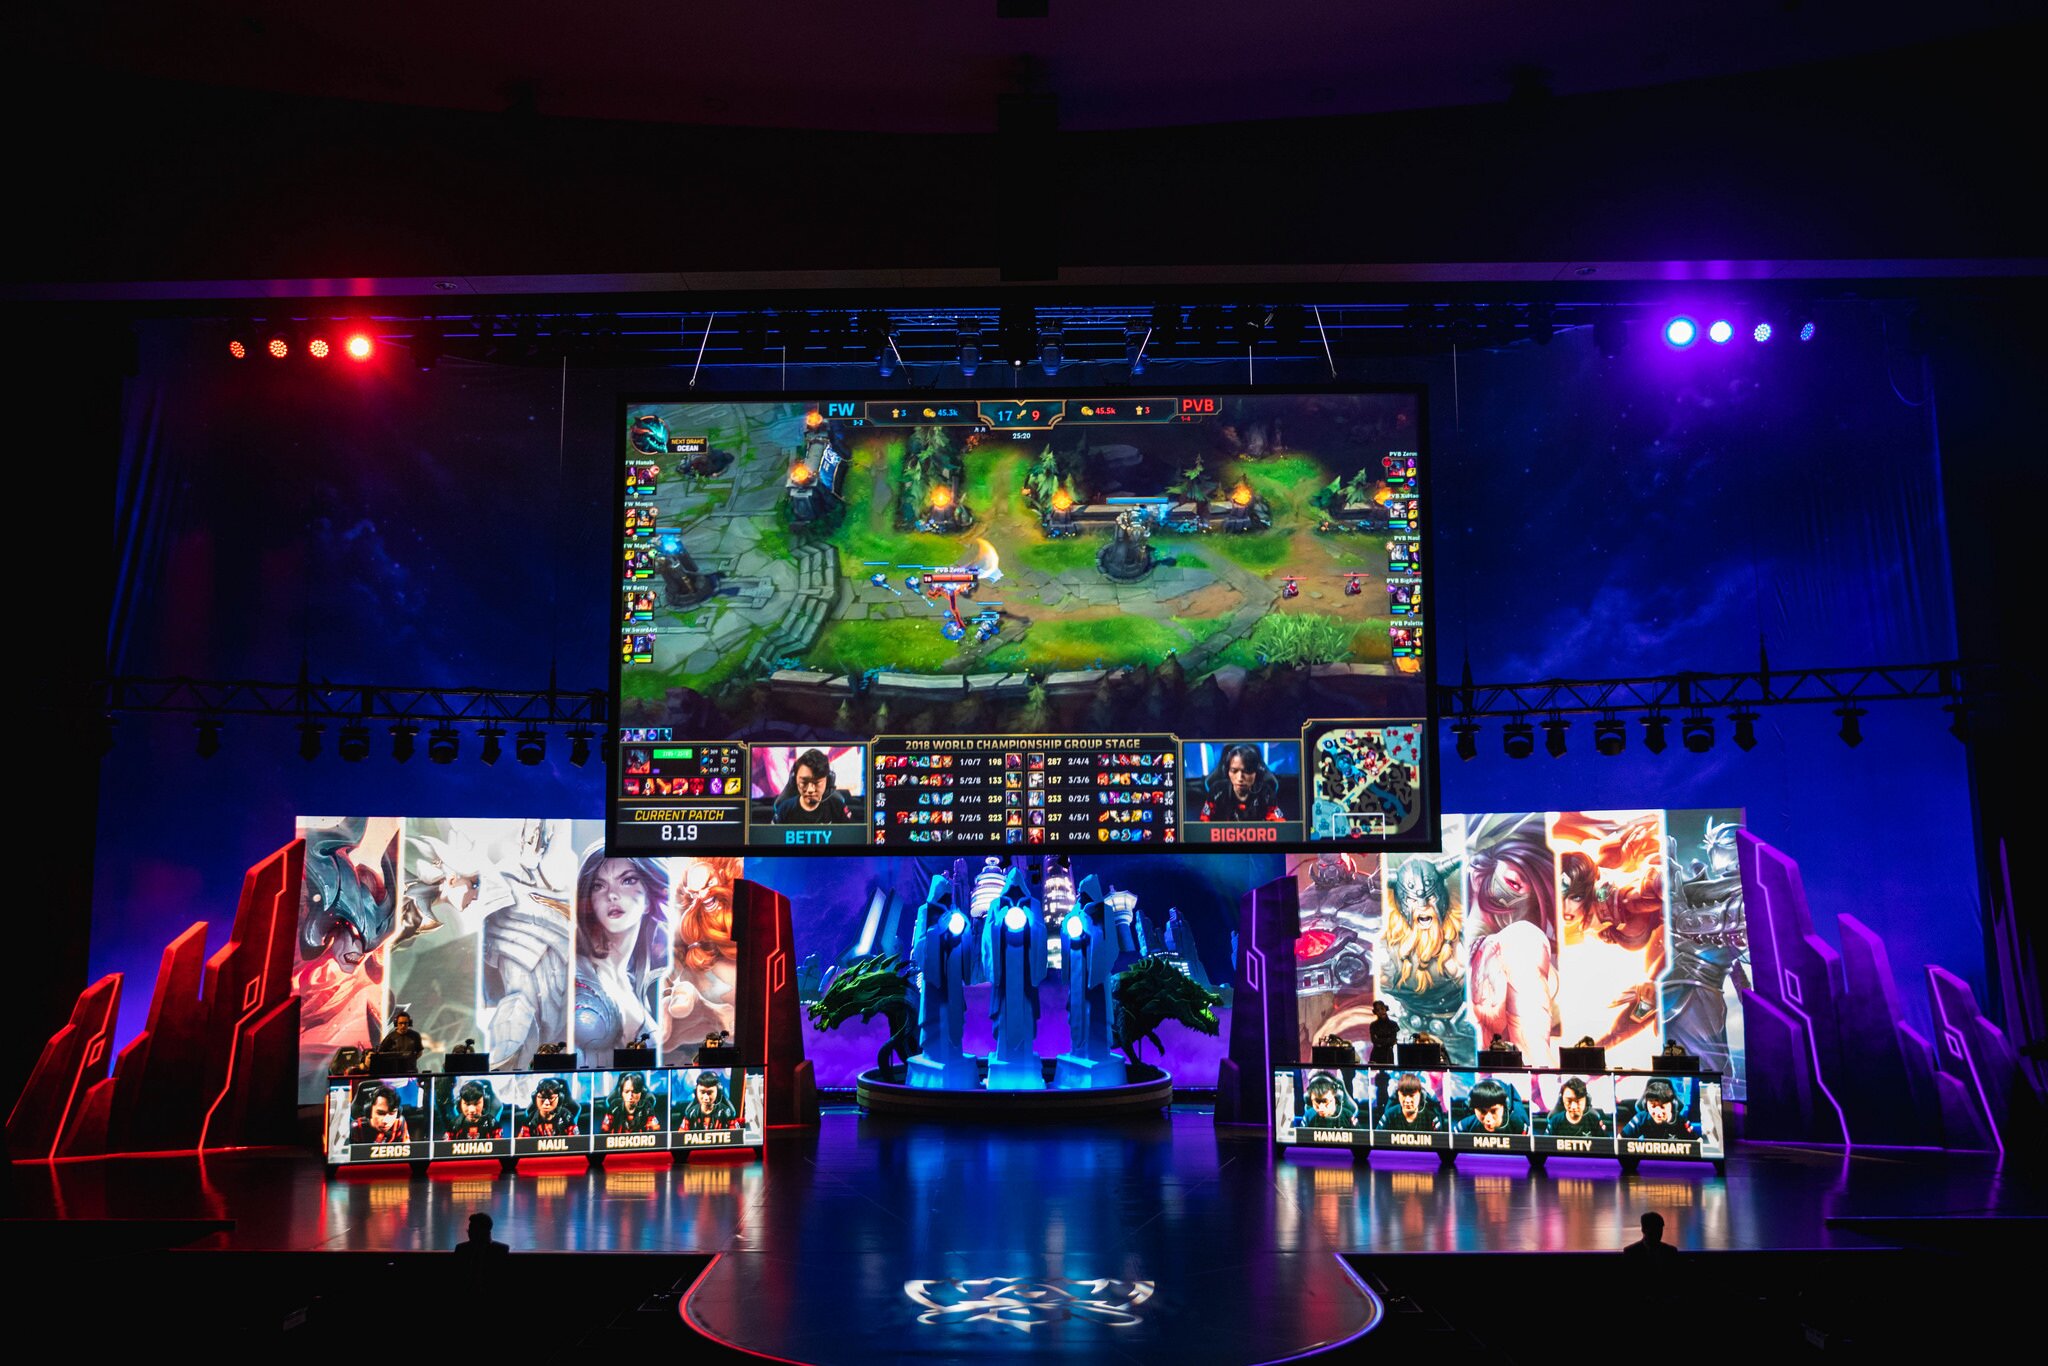 The League of Legends World Championship Quarterfinals kick off on Saturday October 20.